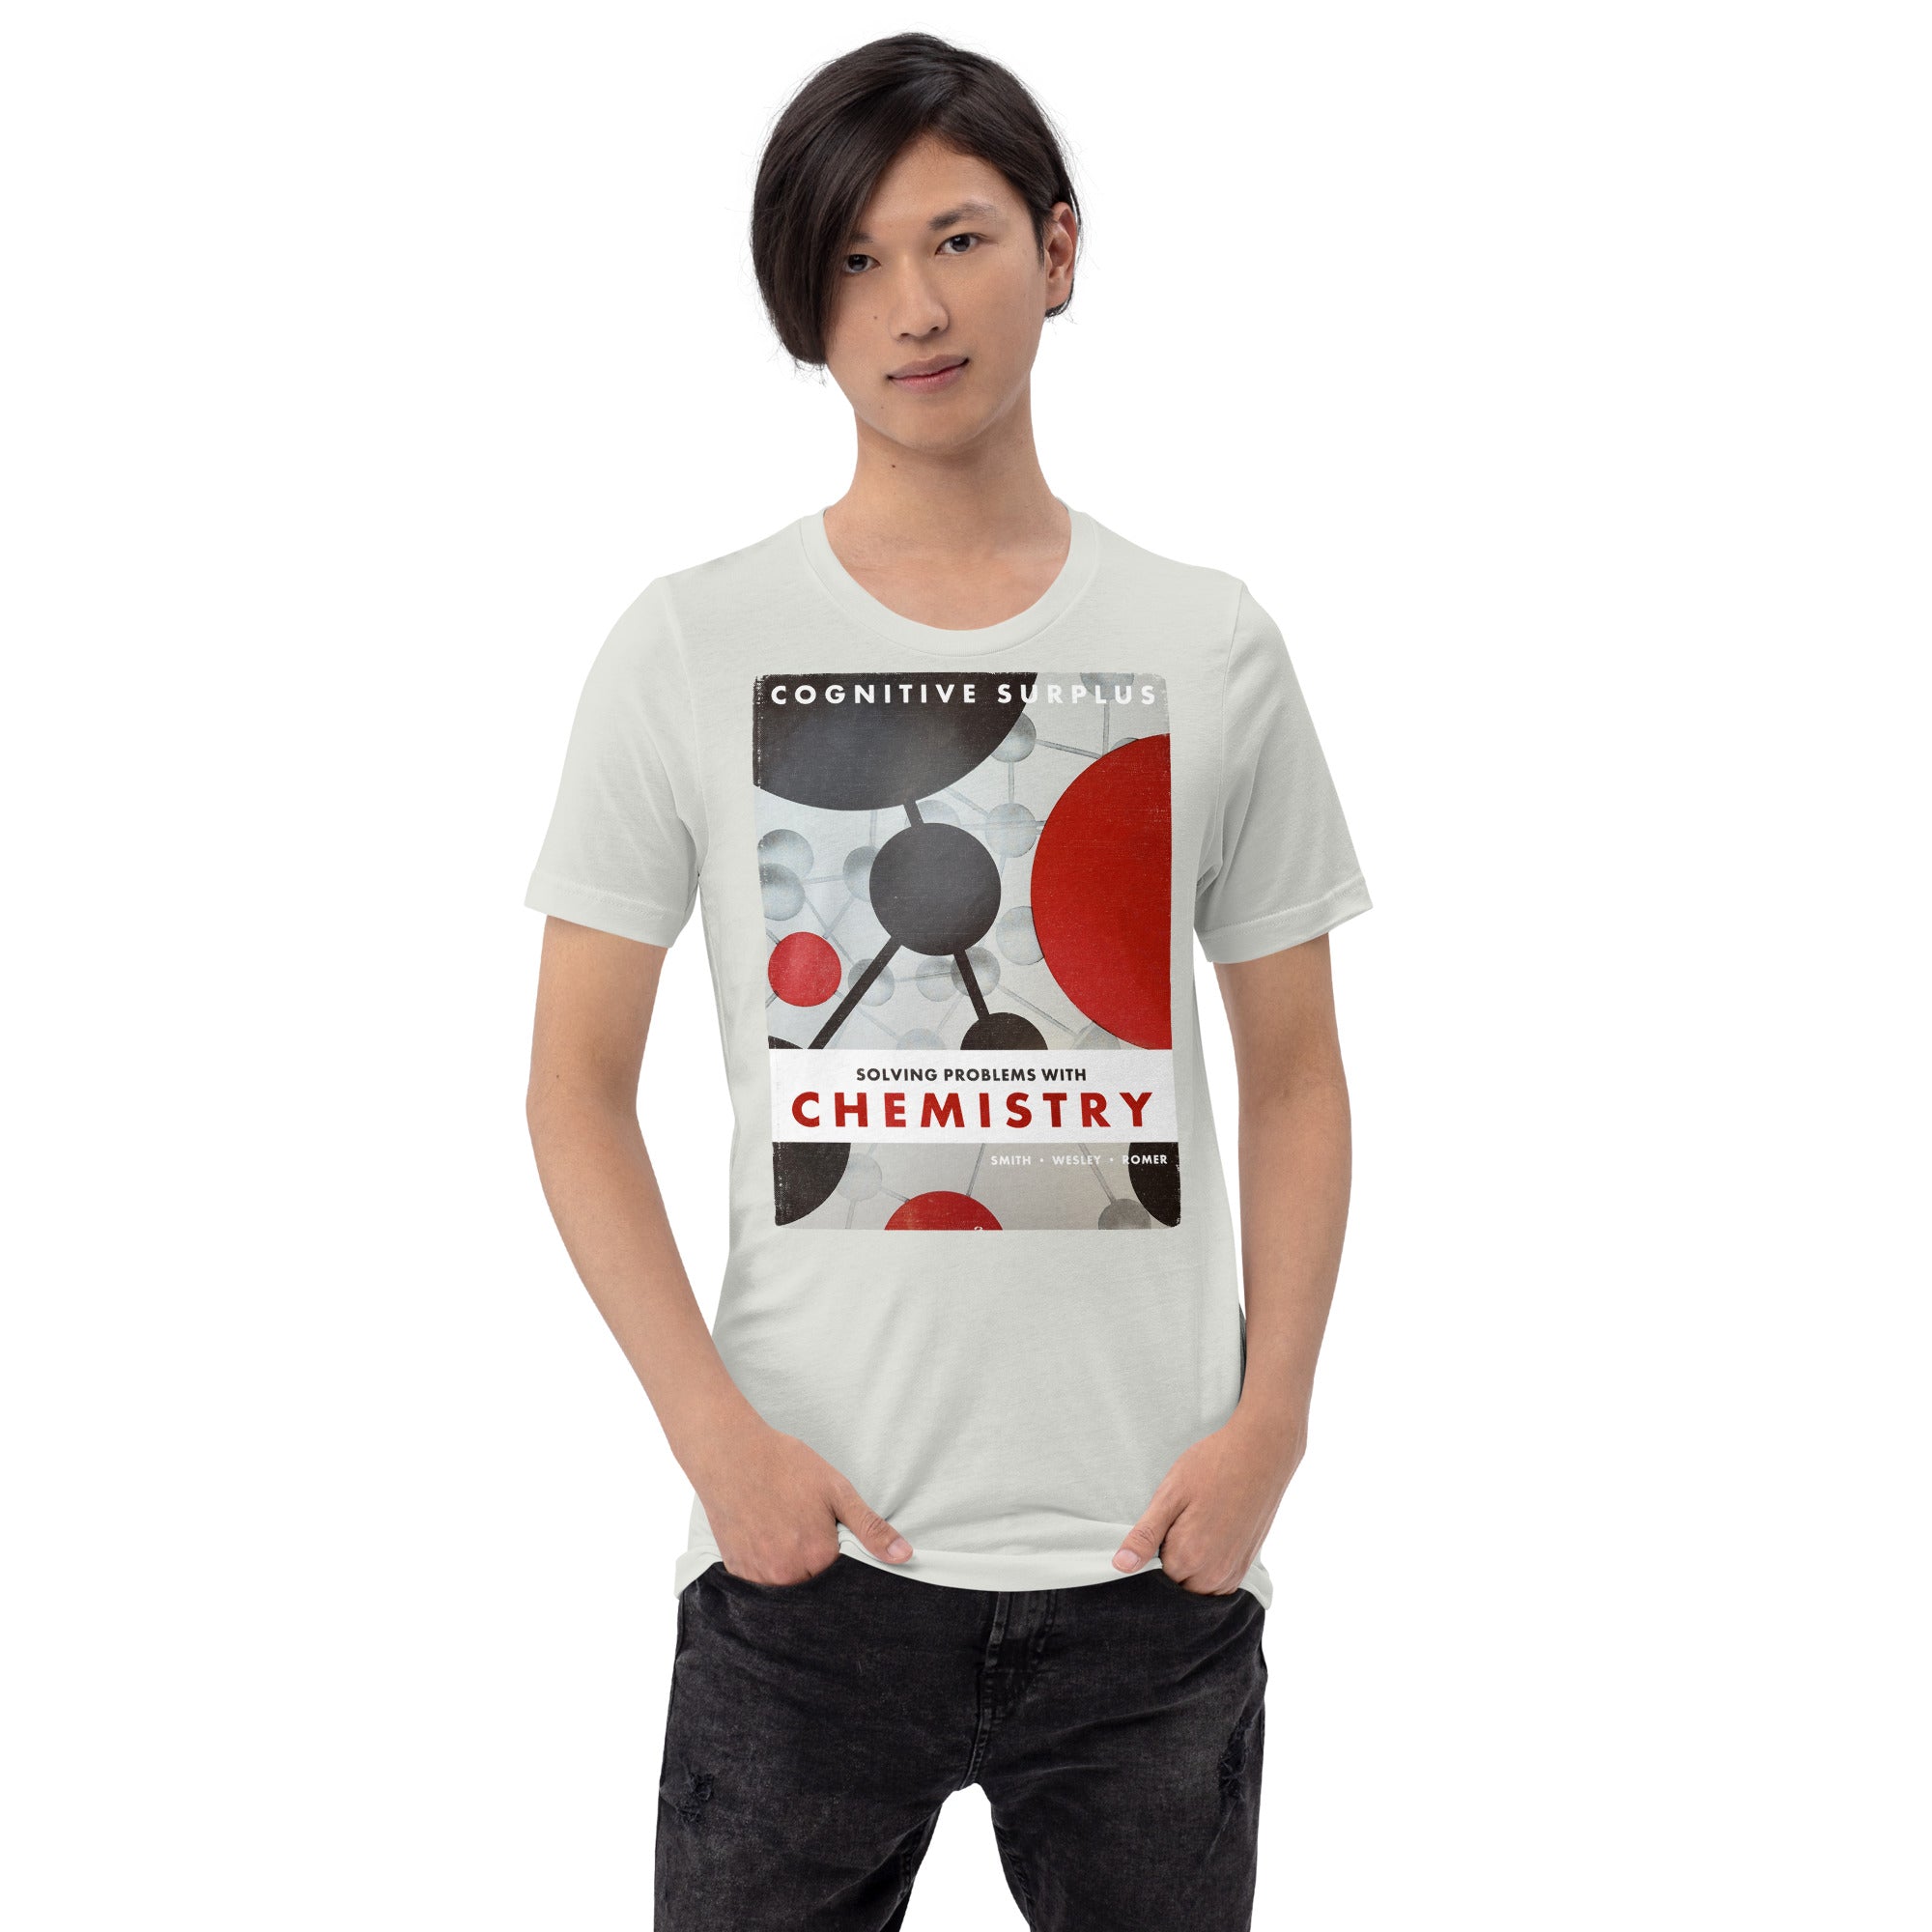 Solving Problems With Chemistry Graphic Tee